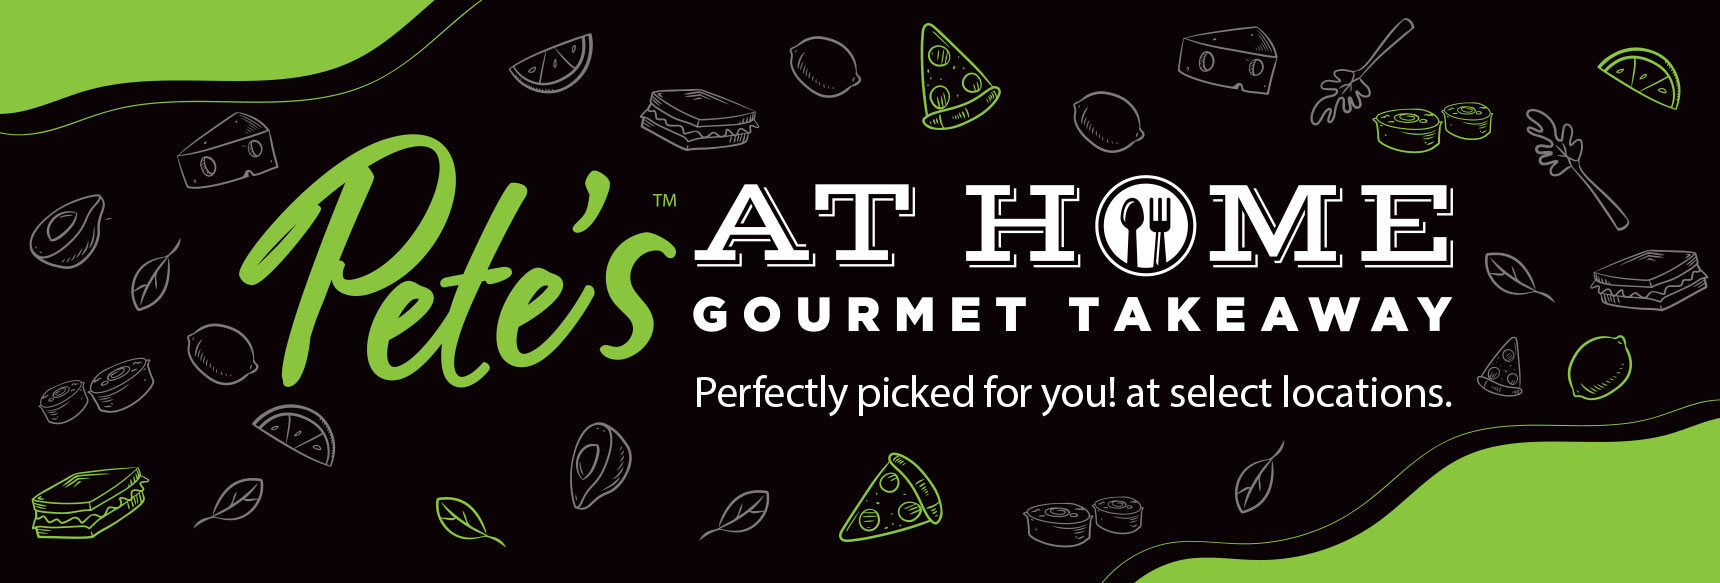 Text Reading "Pete's at home gourmet takeaway. Perfectly picked up for you!at selected locations."